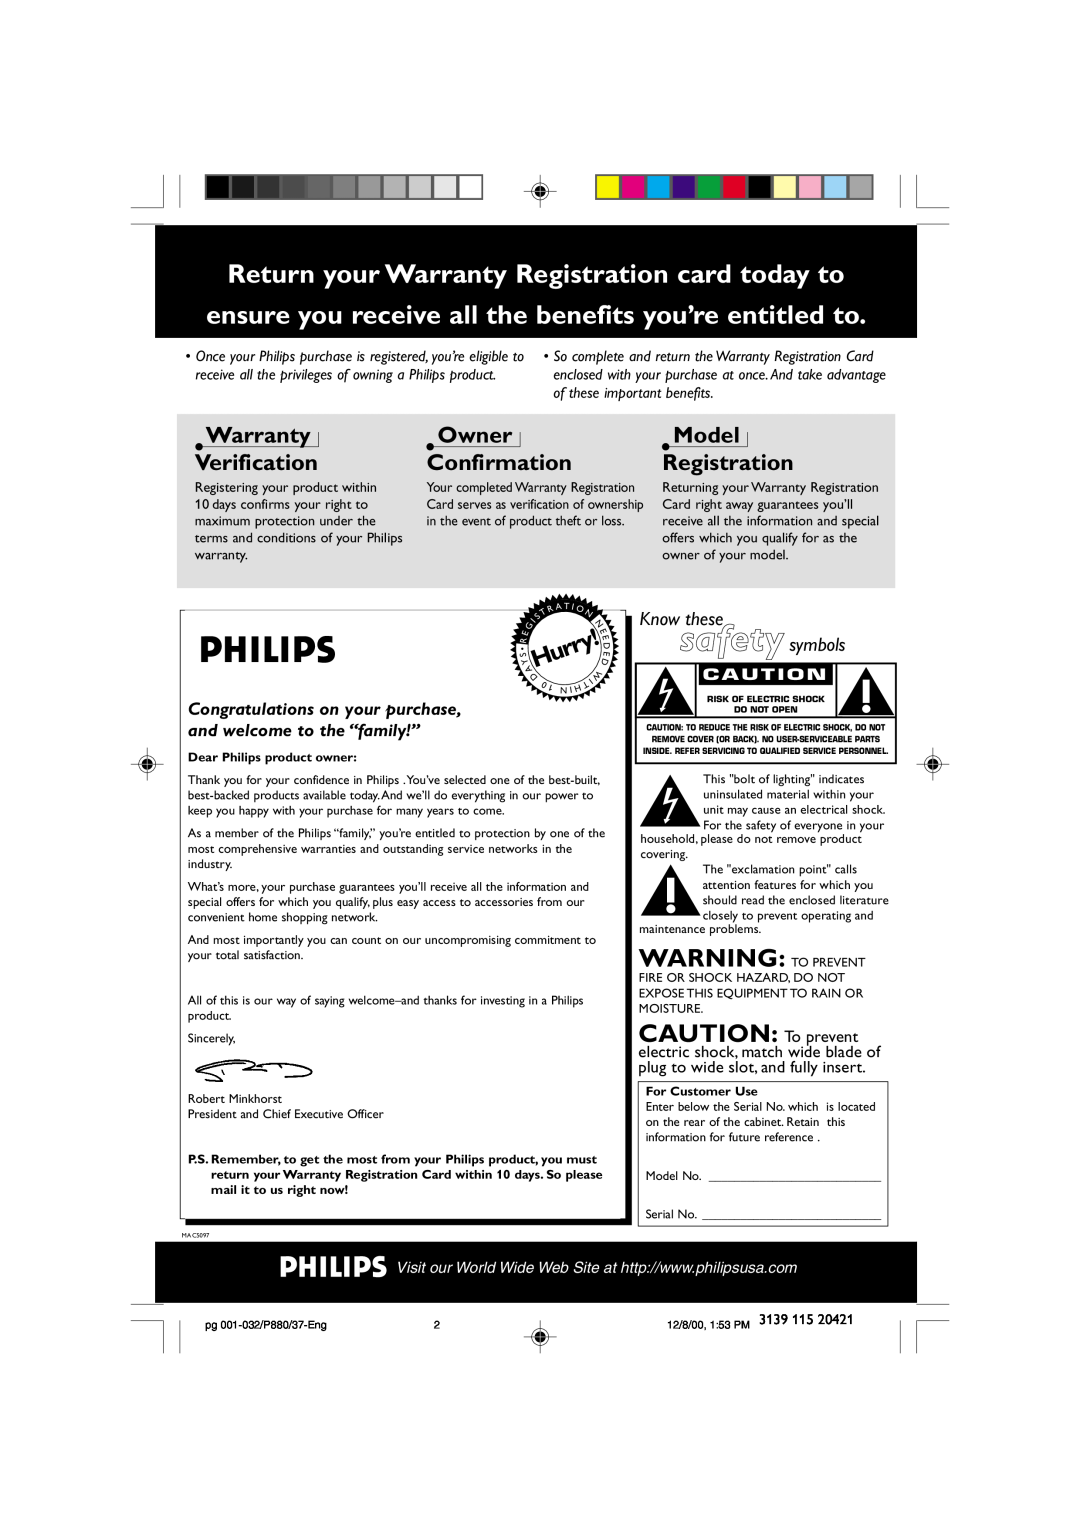 Philips P880 Warranty Verification, Owner Confirmation, Model Registration, AHurry, C A U T I O N, For Customer Use, R A 